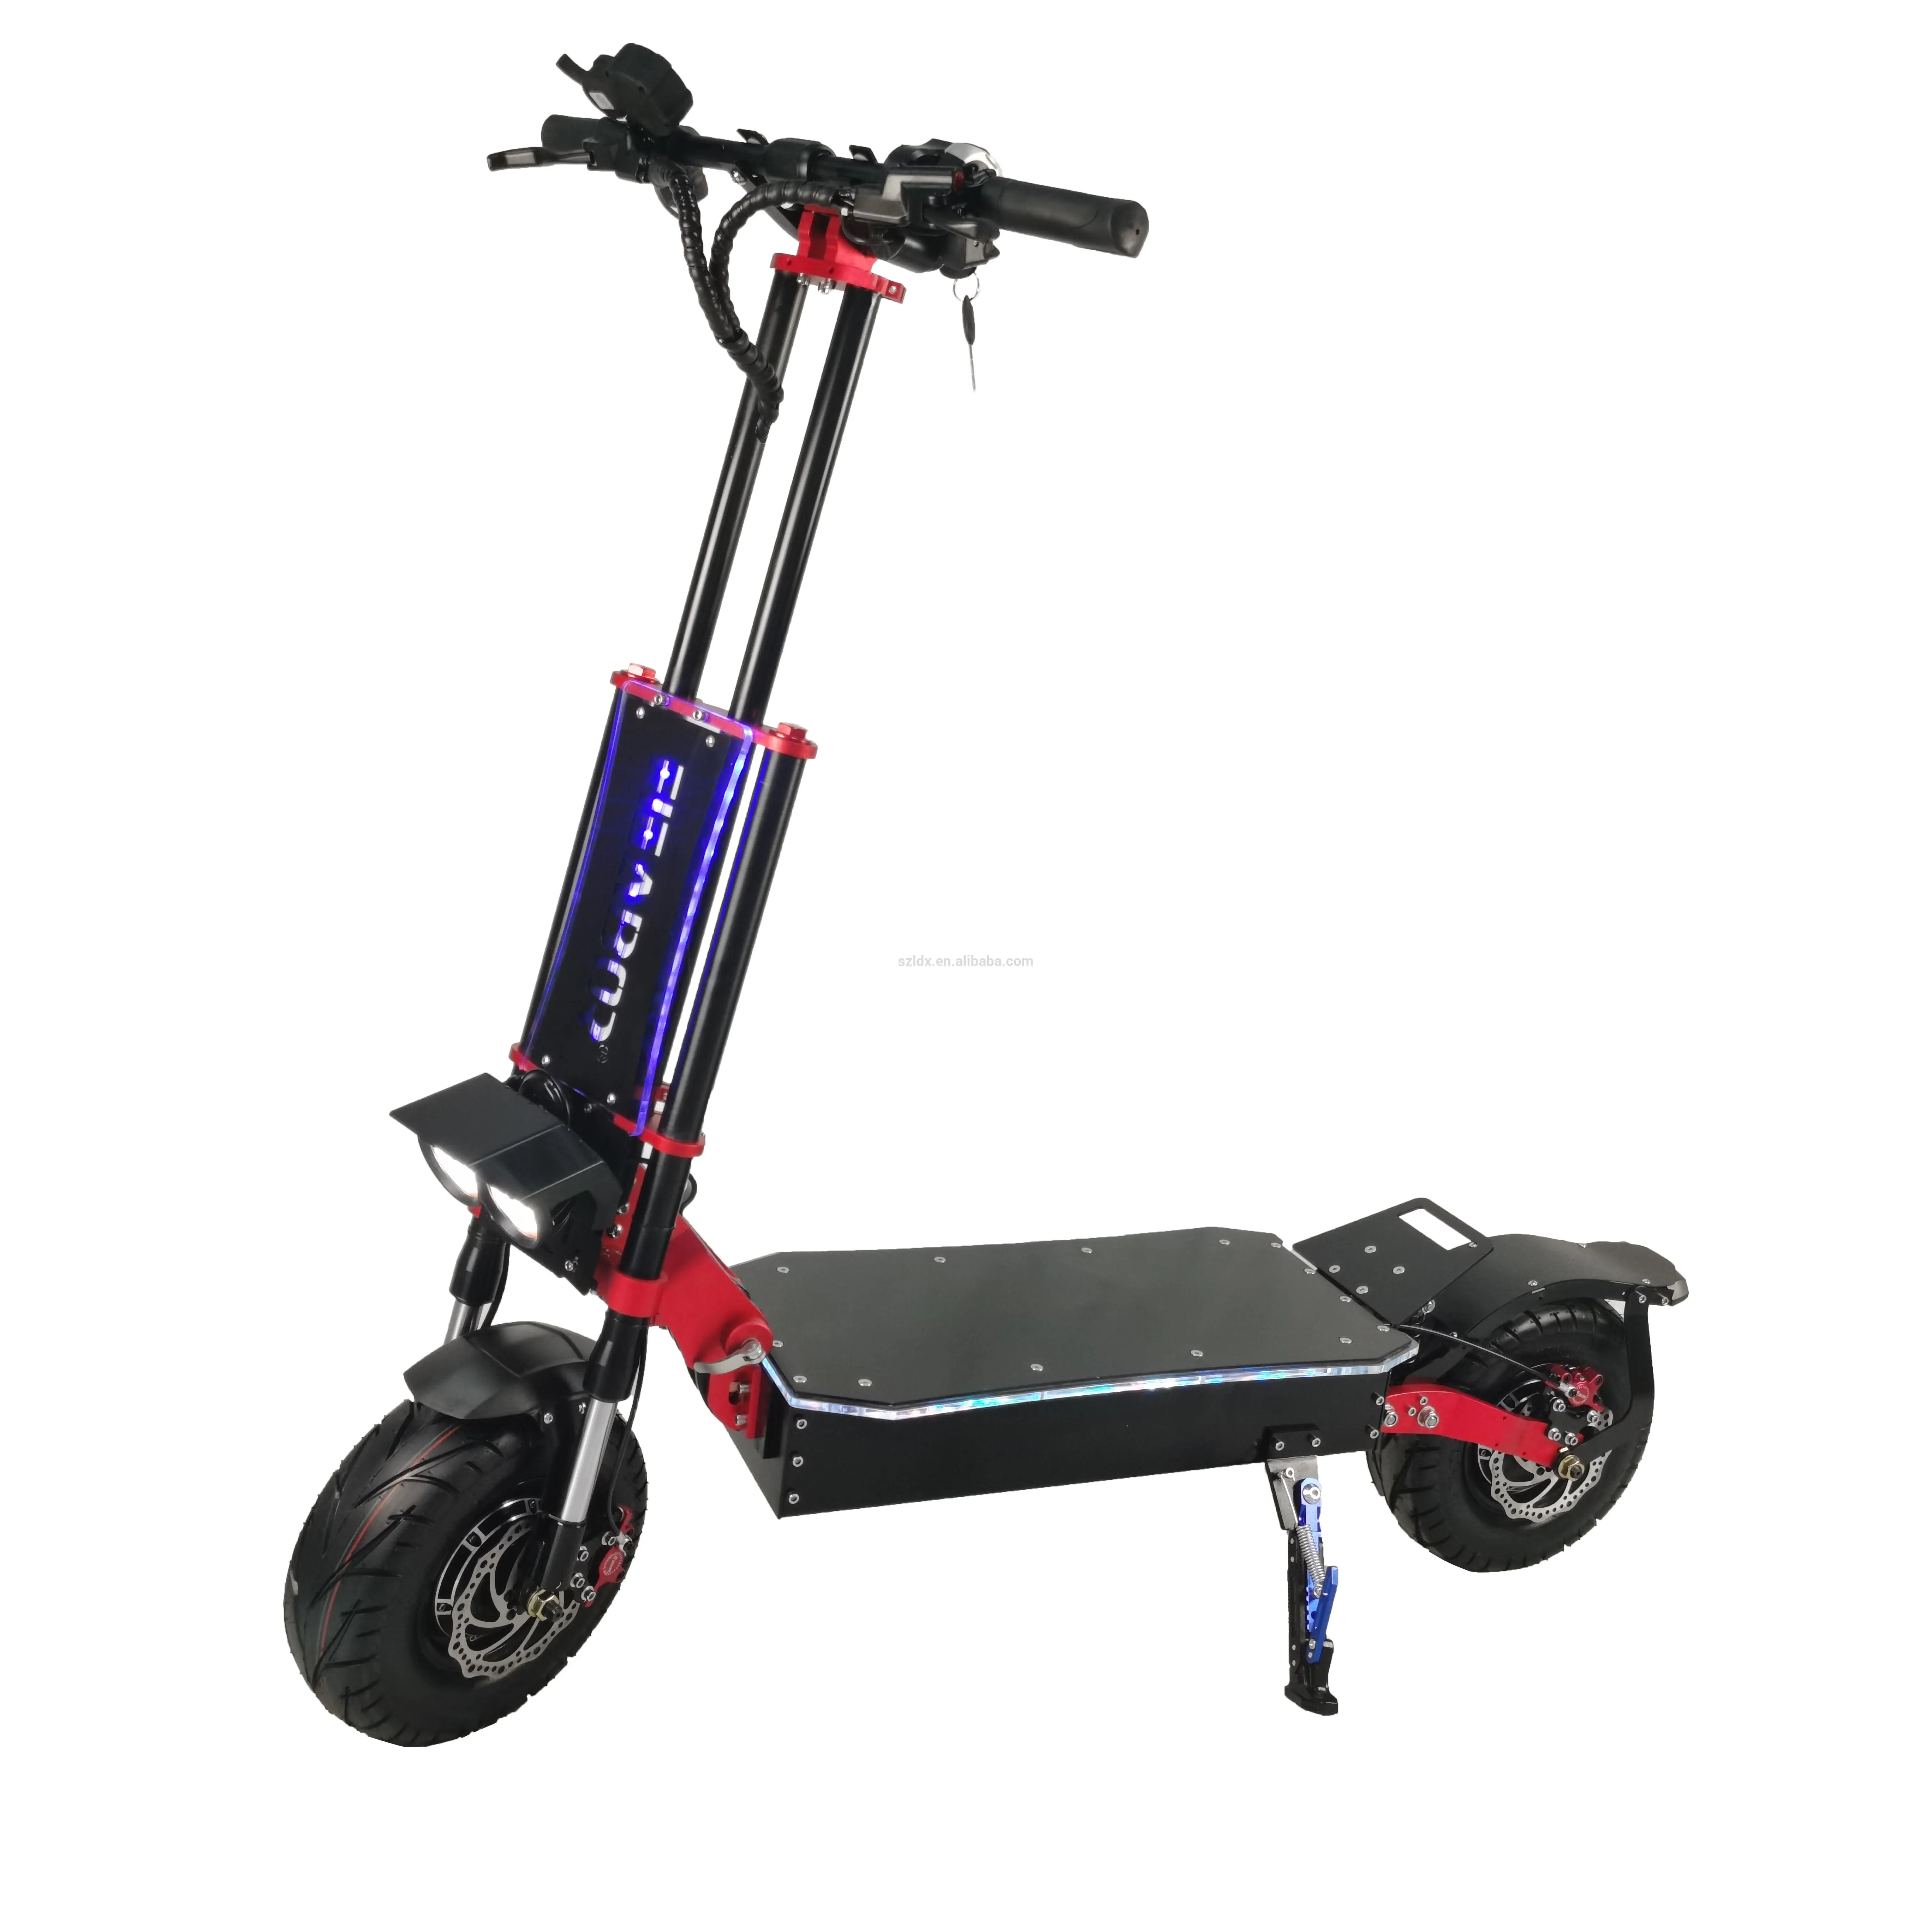 FIEABOR new three-pole electric scooter 8000W high power 72V large battery two-wheeled off-road high-speed driving balance